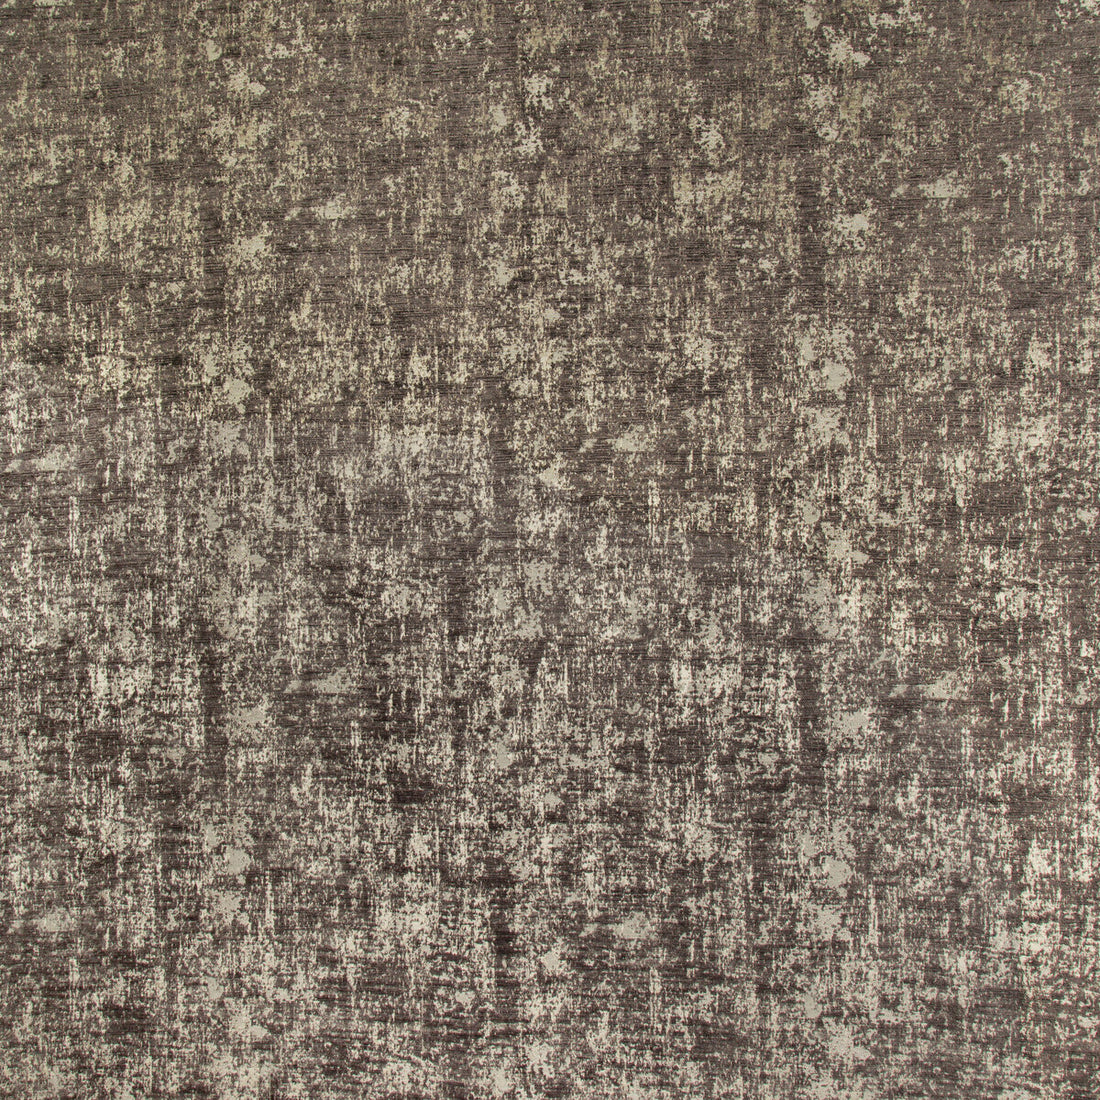 Les Ecorces Woven fabric in grey color - pattern 8017130.11.0 - by Brunschwig &amp; Fils in the Les Ensembliers II collection